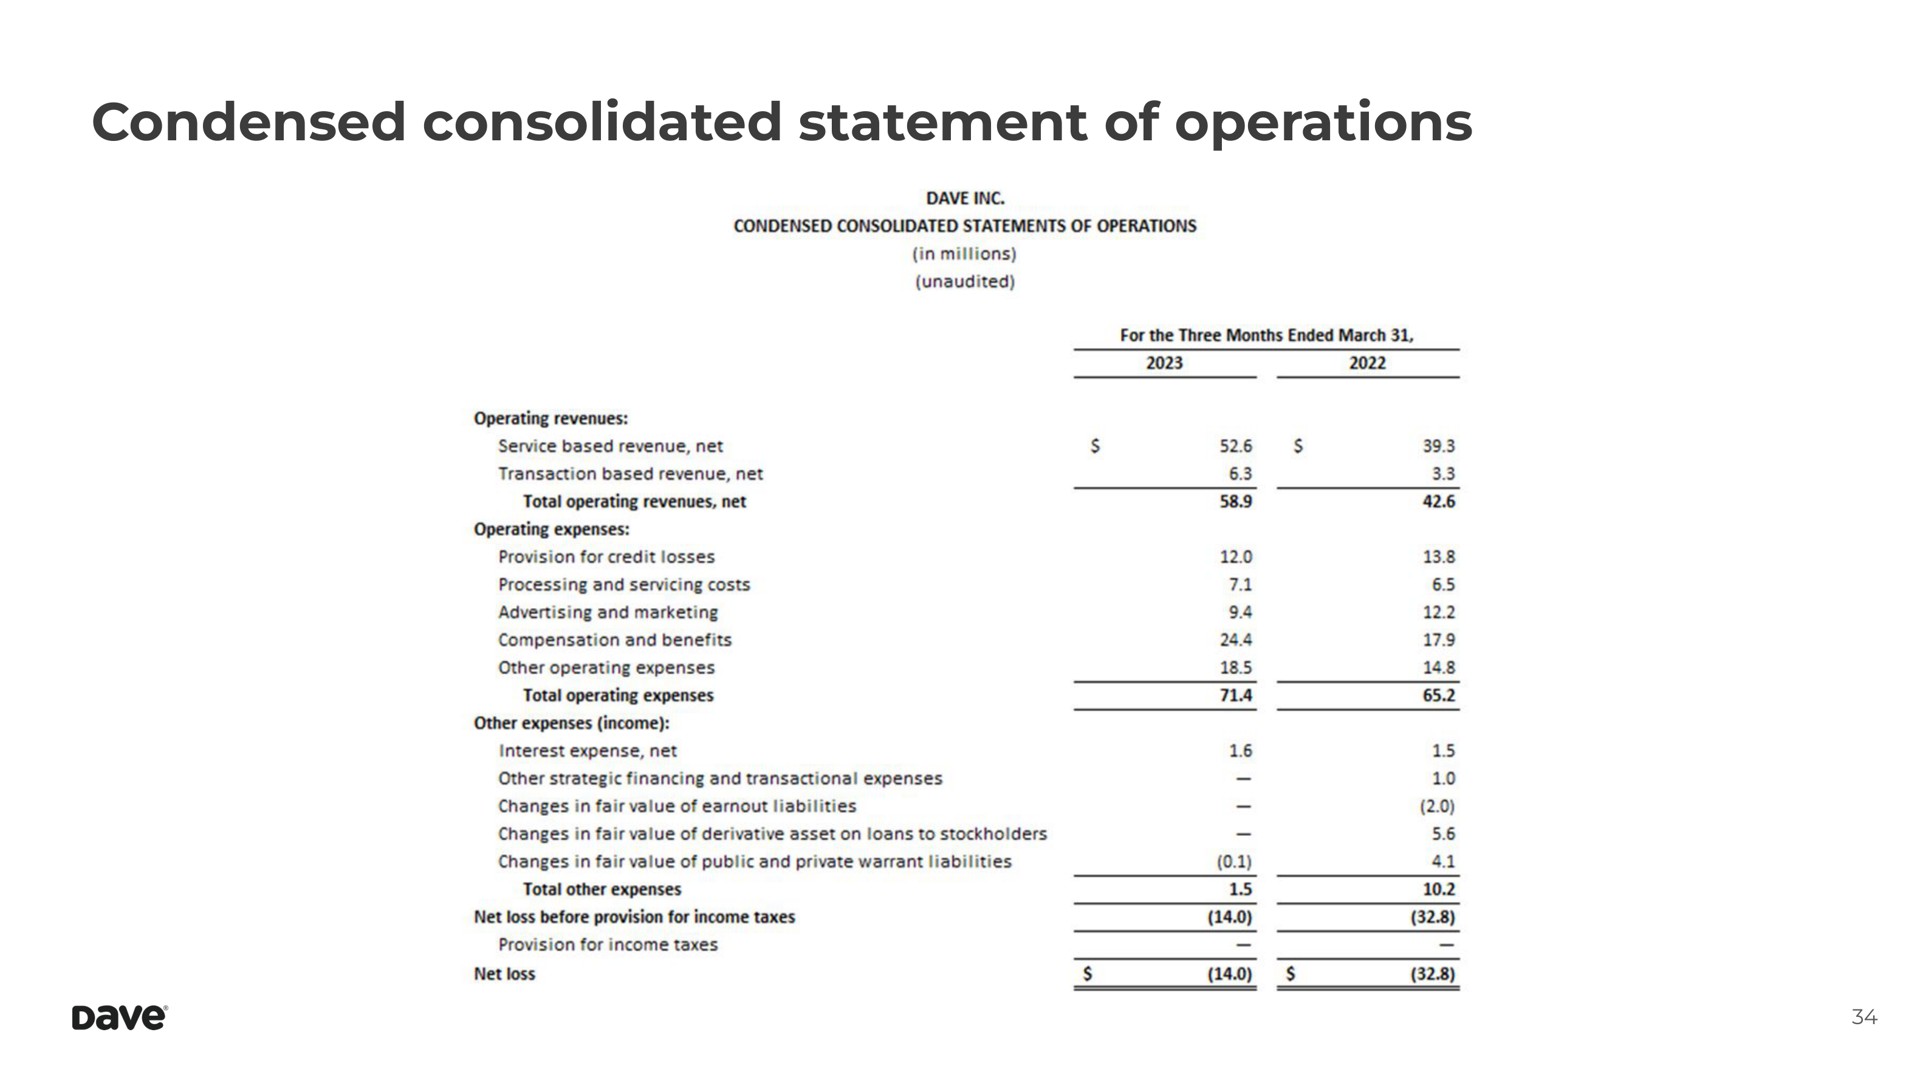 condensed consolidated statement of operations | Dave